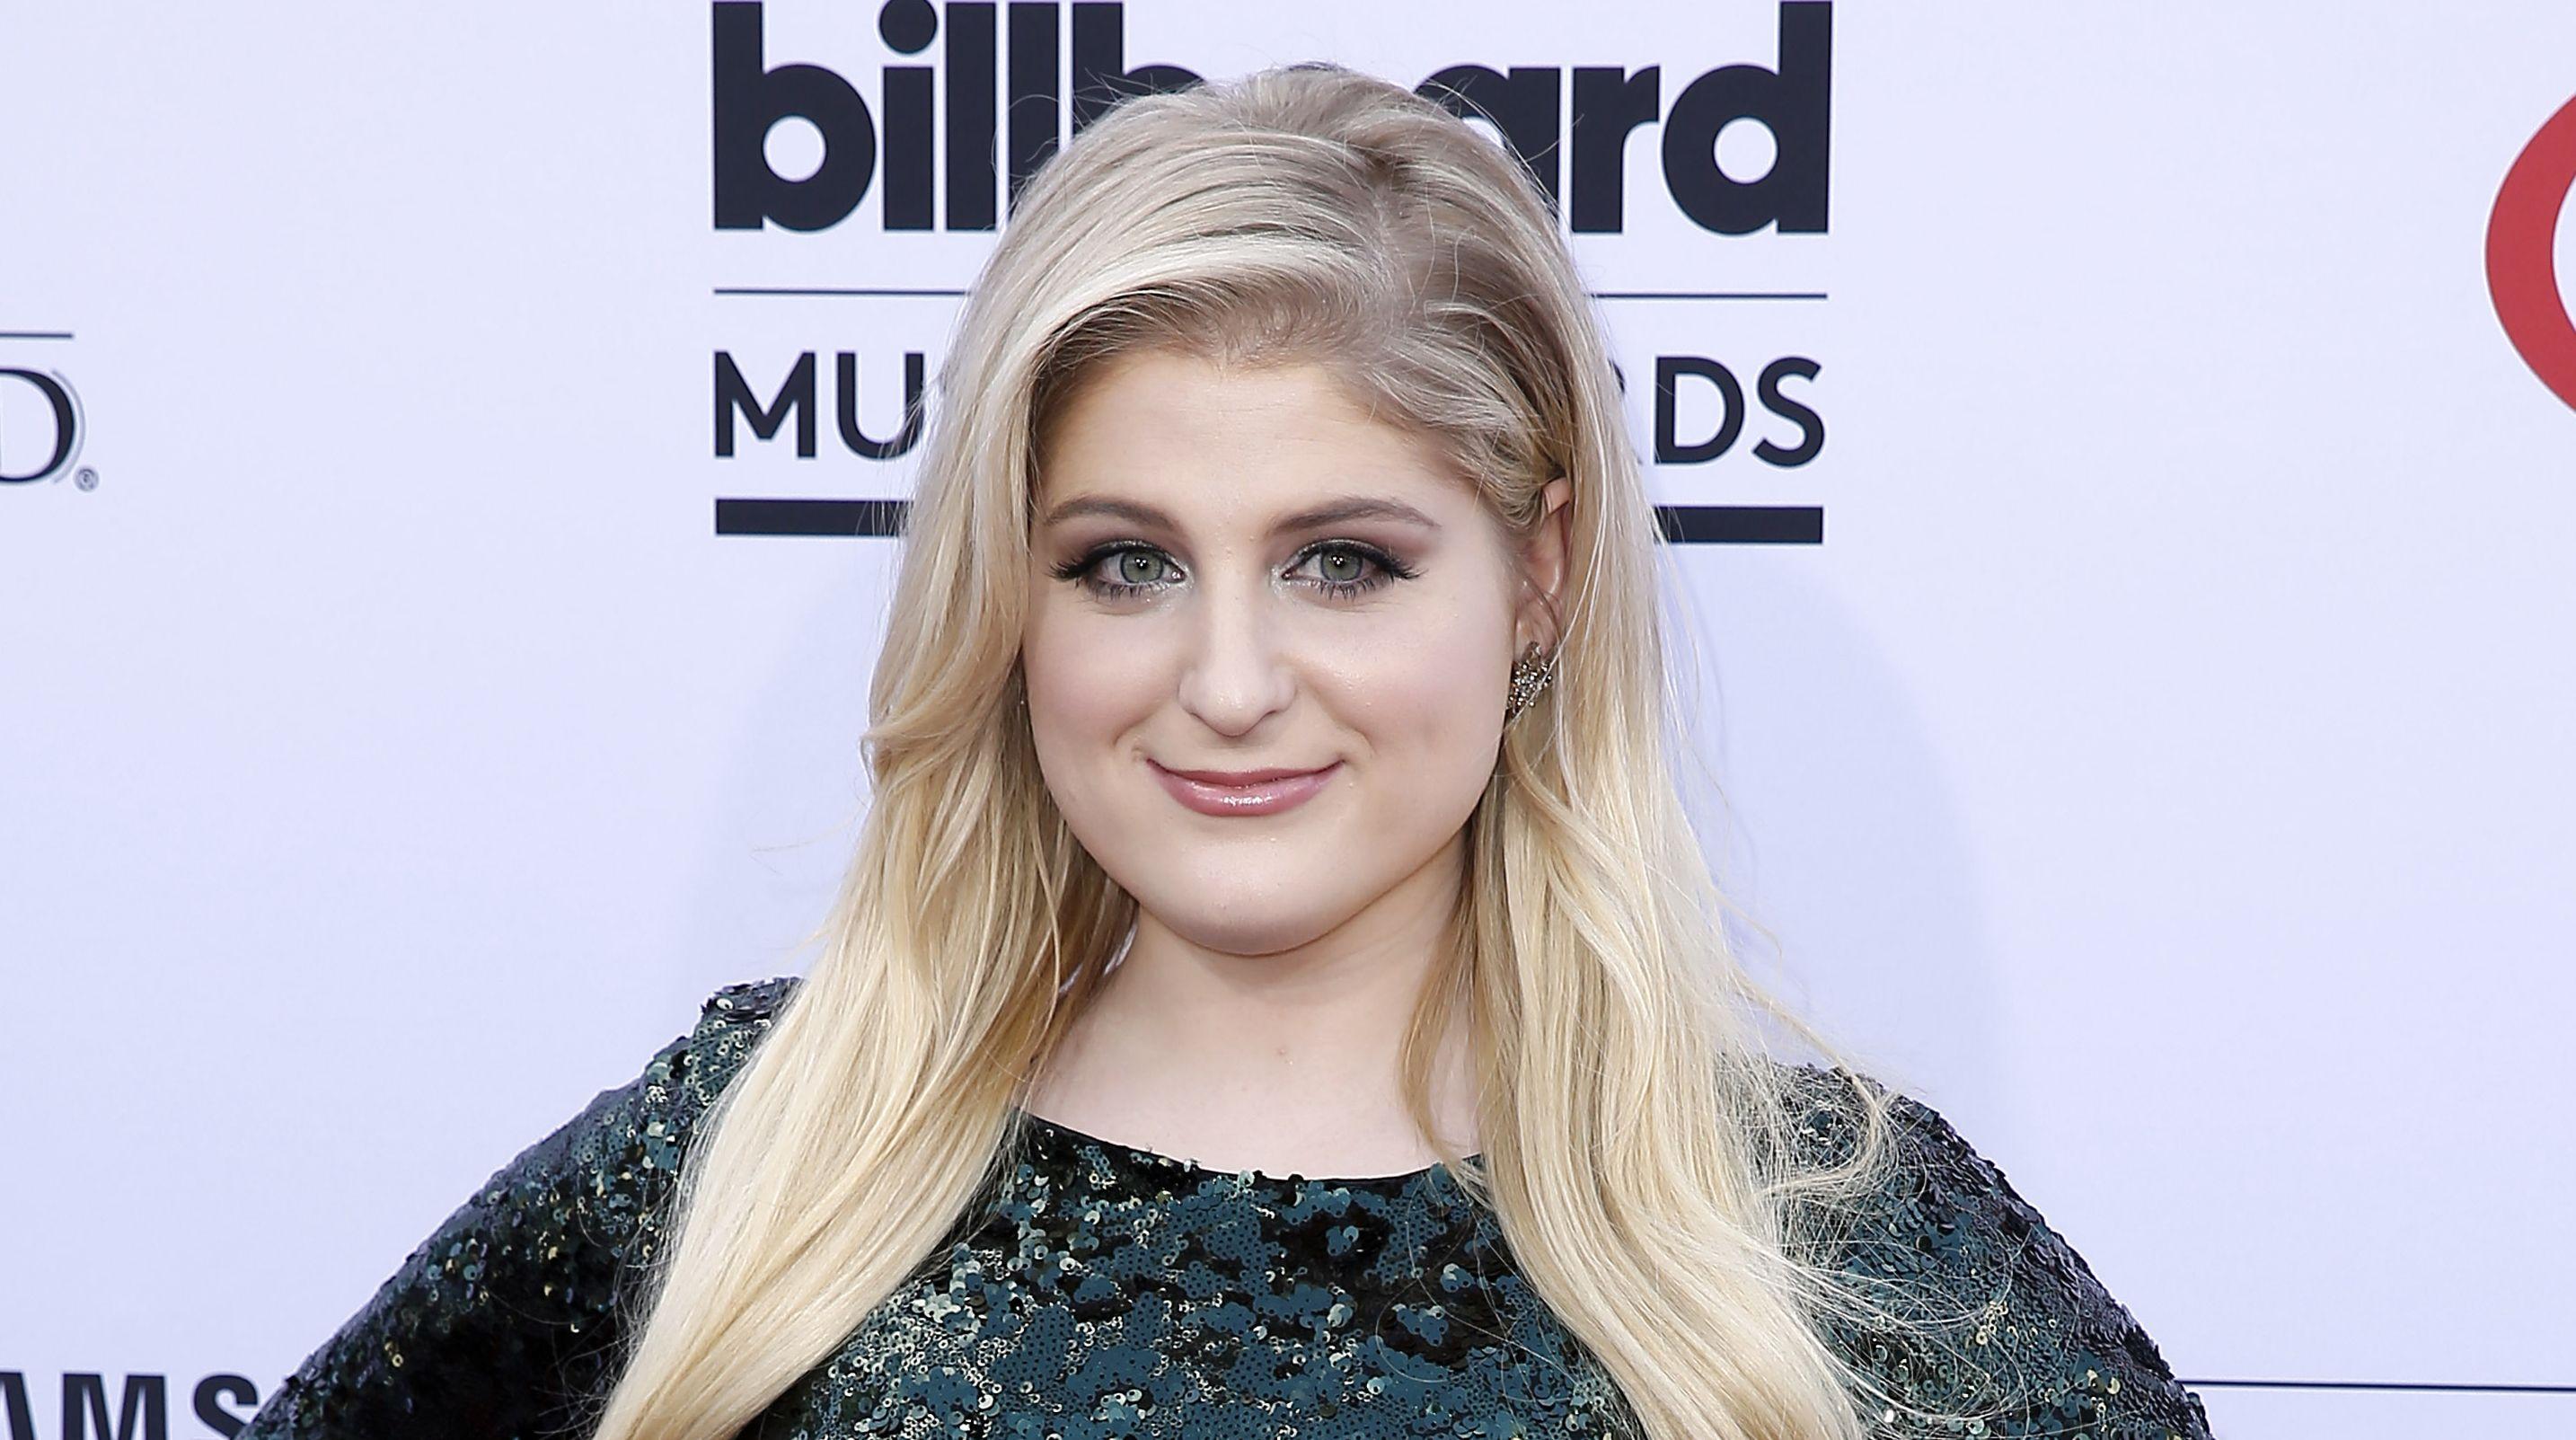 Awesome Meghan Trainor Wallpaper. Full HD Picture